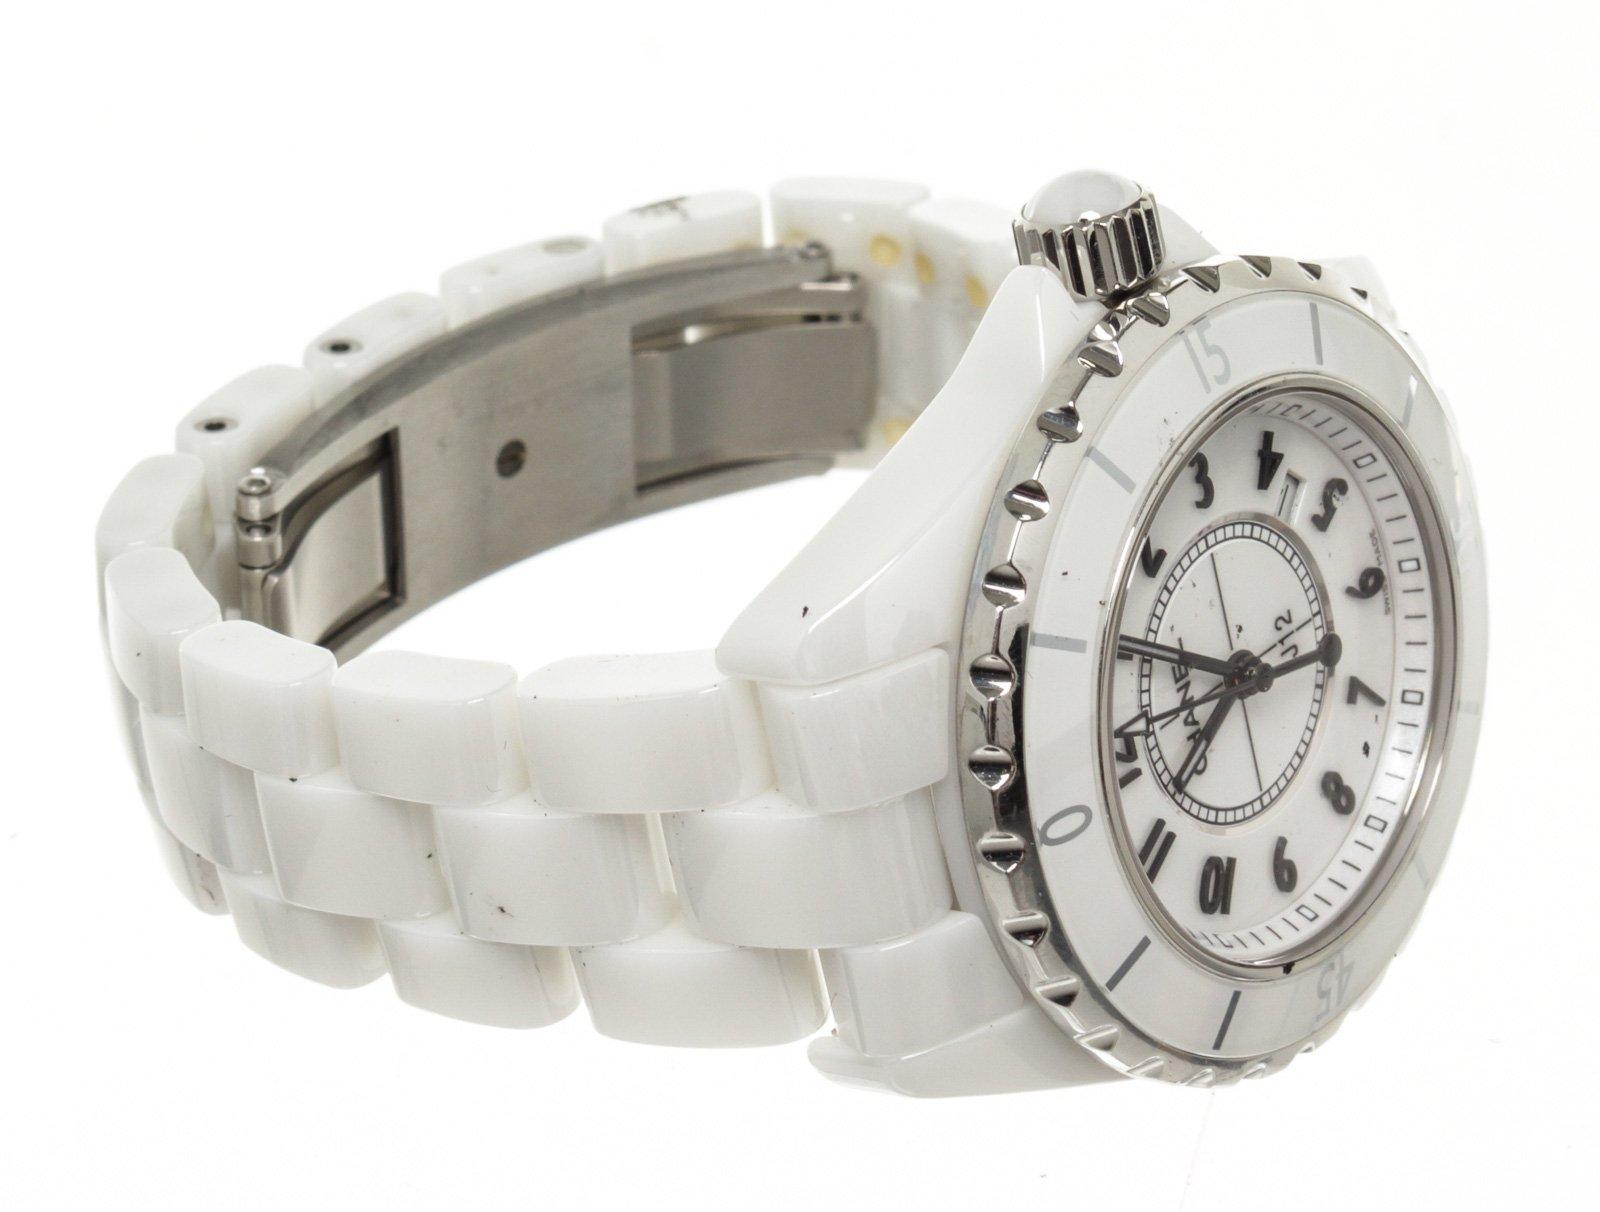 Chanel White Ceramic W/Extra Links Watch with gold-tone hardware.

47249MSC